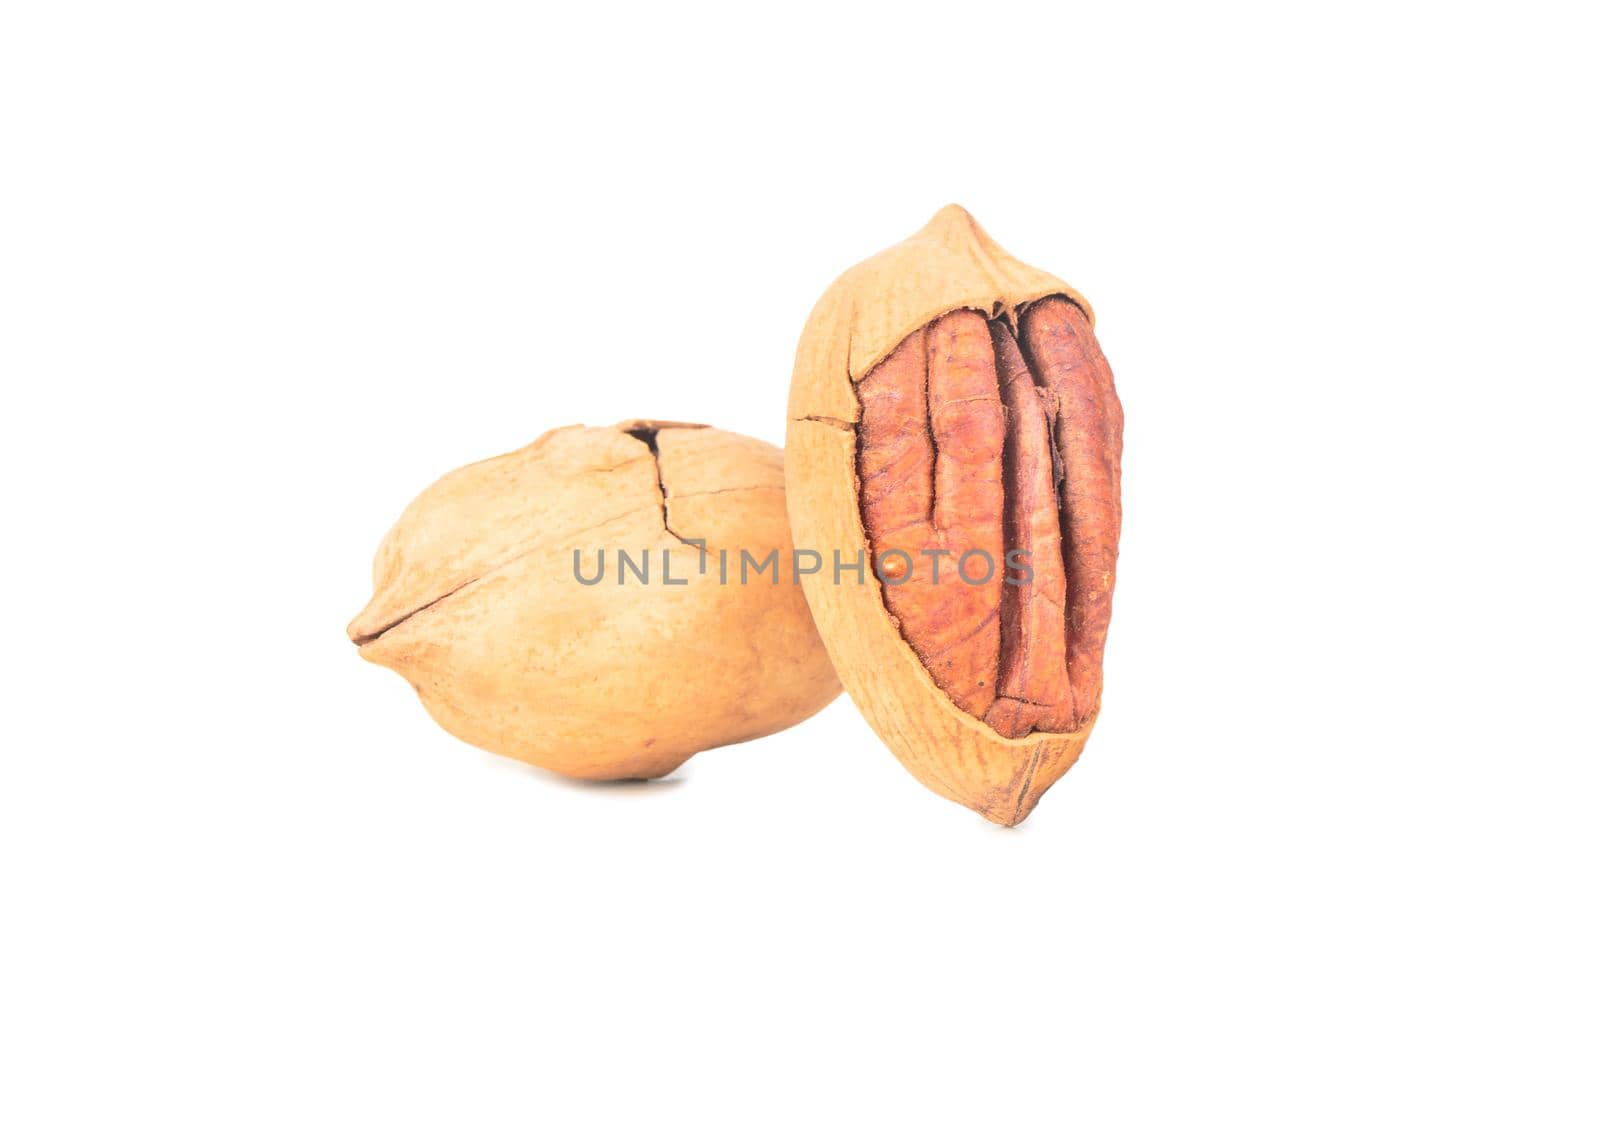 Two dry pecans in cracked shells on a white background